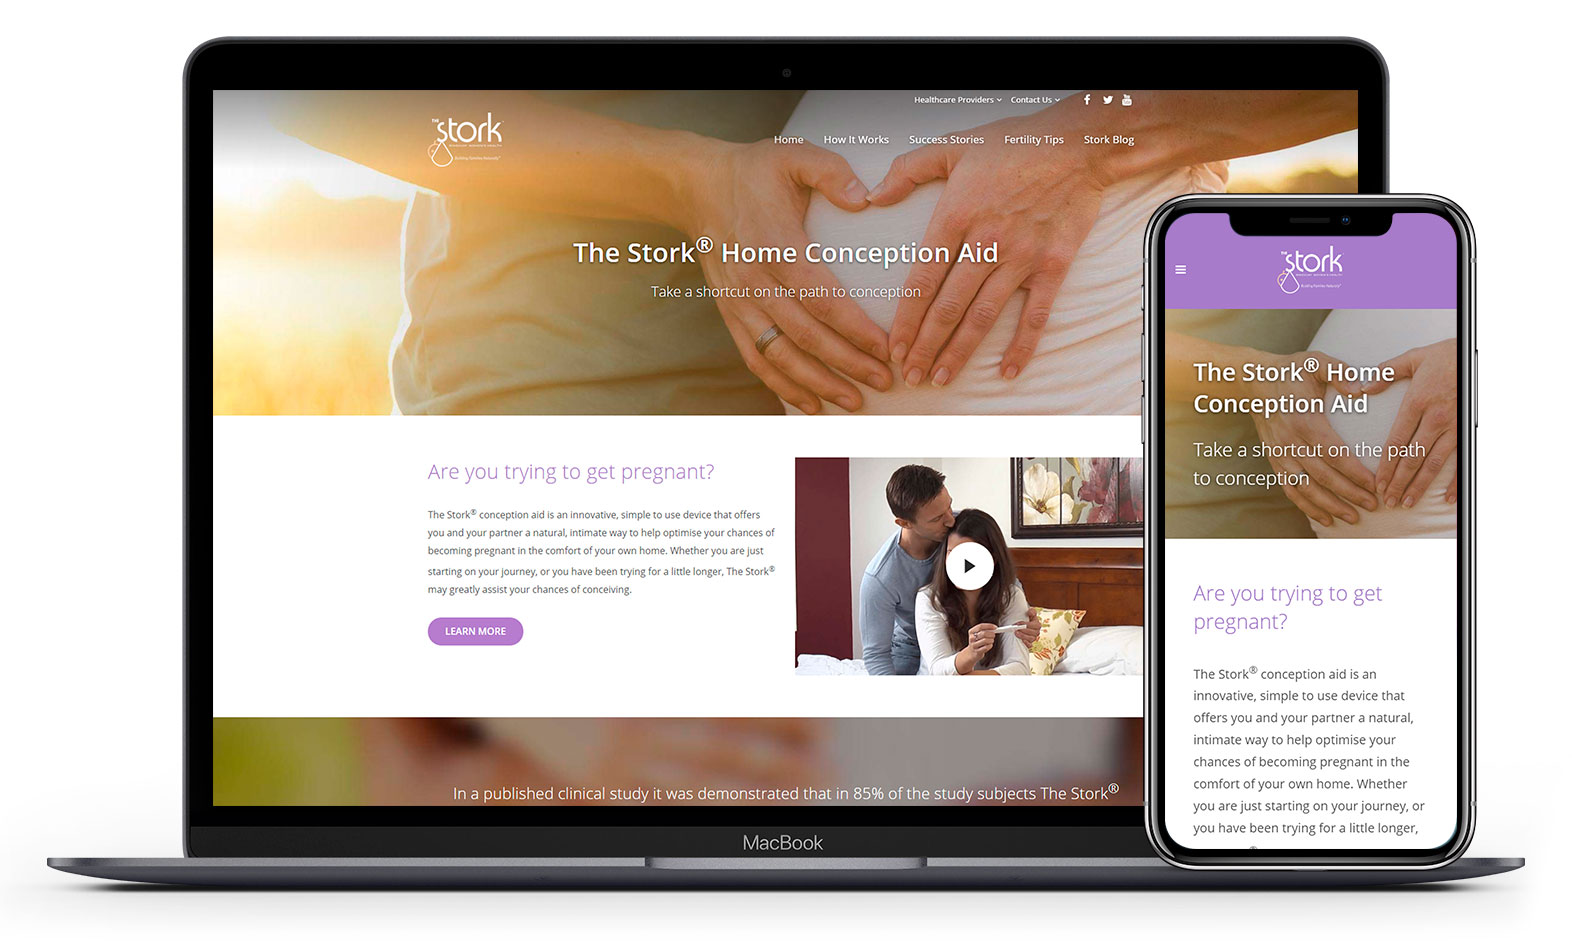 Stork contraception aid's website design displayed responsive devices